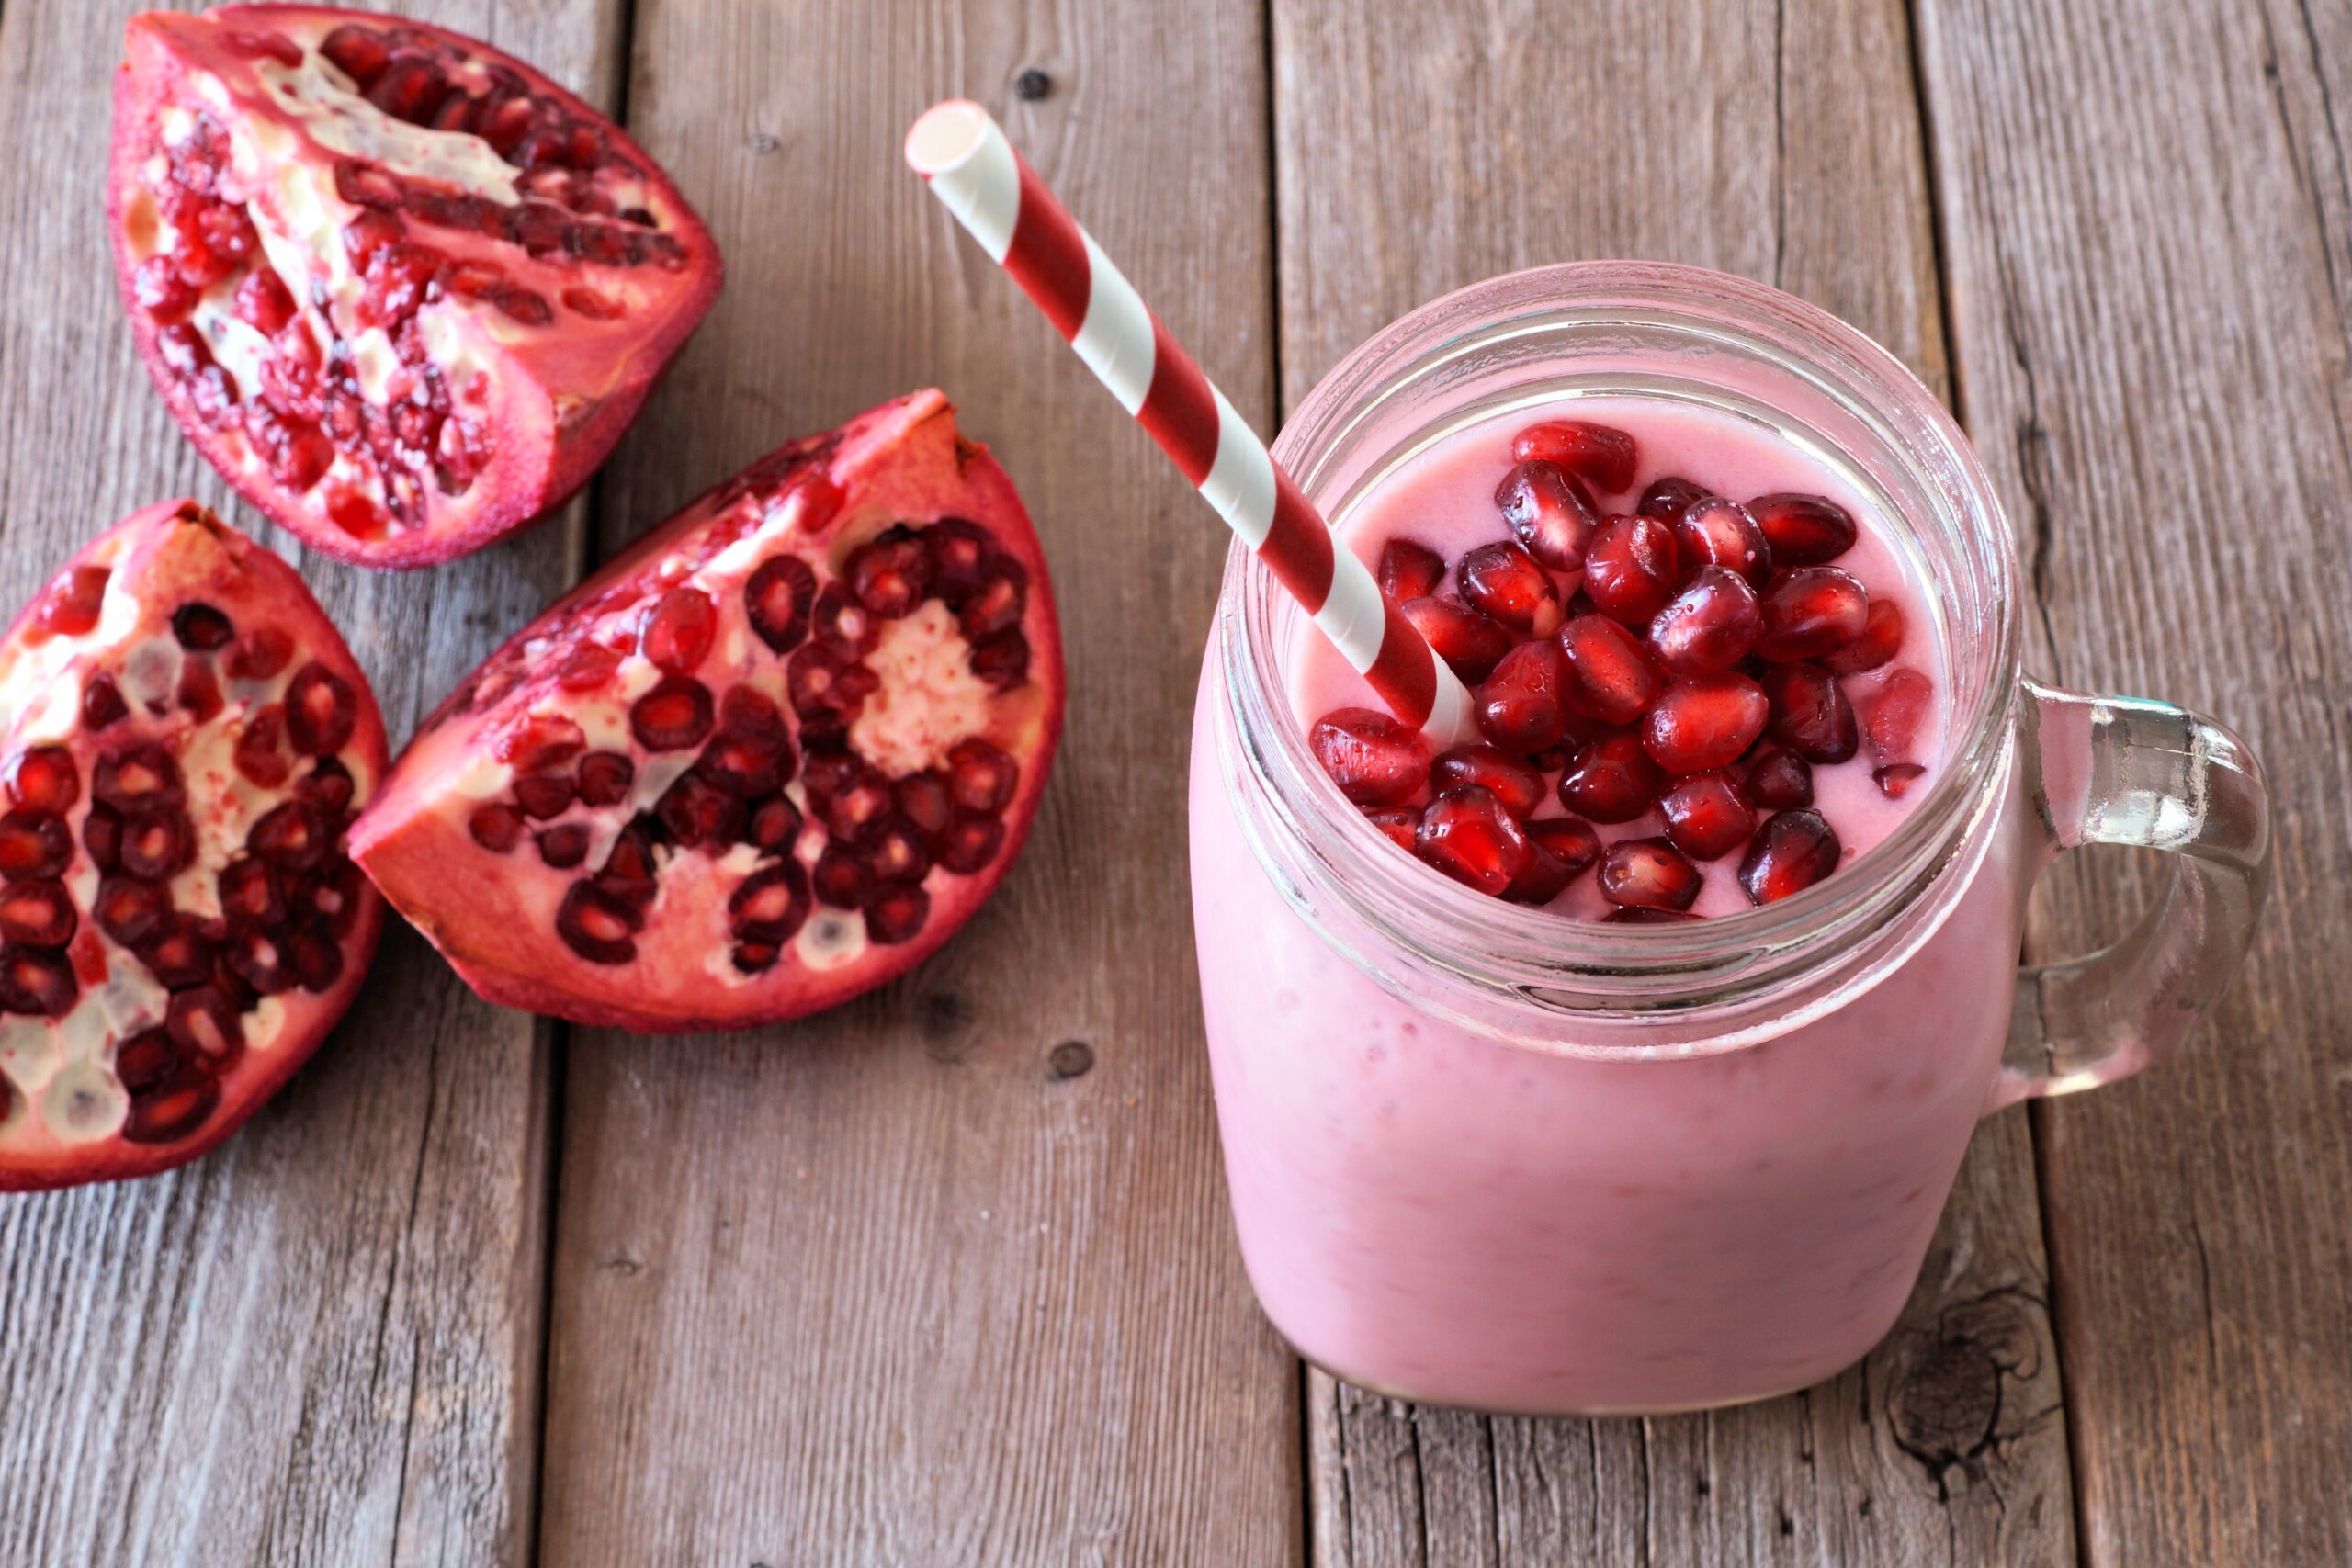 A mason jar filled with pink pomegranate frappe, topped with pomegranate seeds, and a red-and-white striped straw. Beside the jar, there are three halves of a pomegranate on a wooden table.